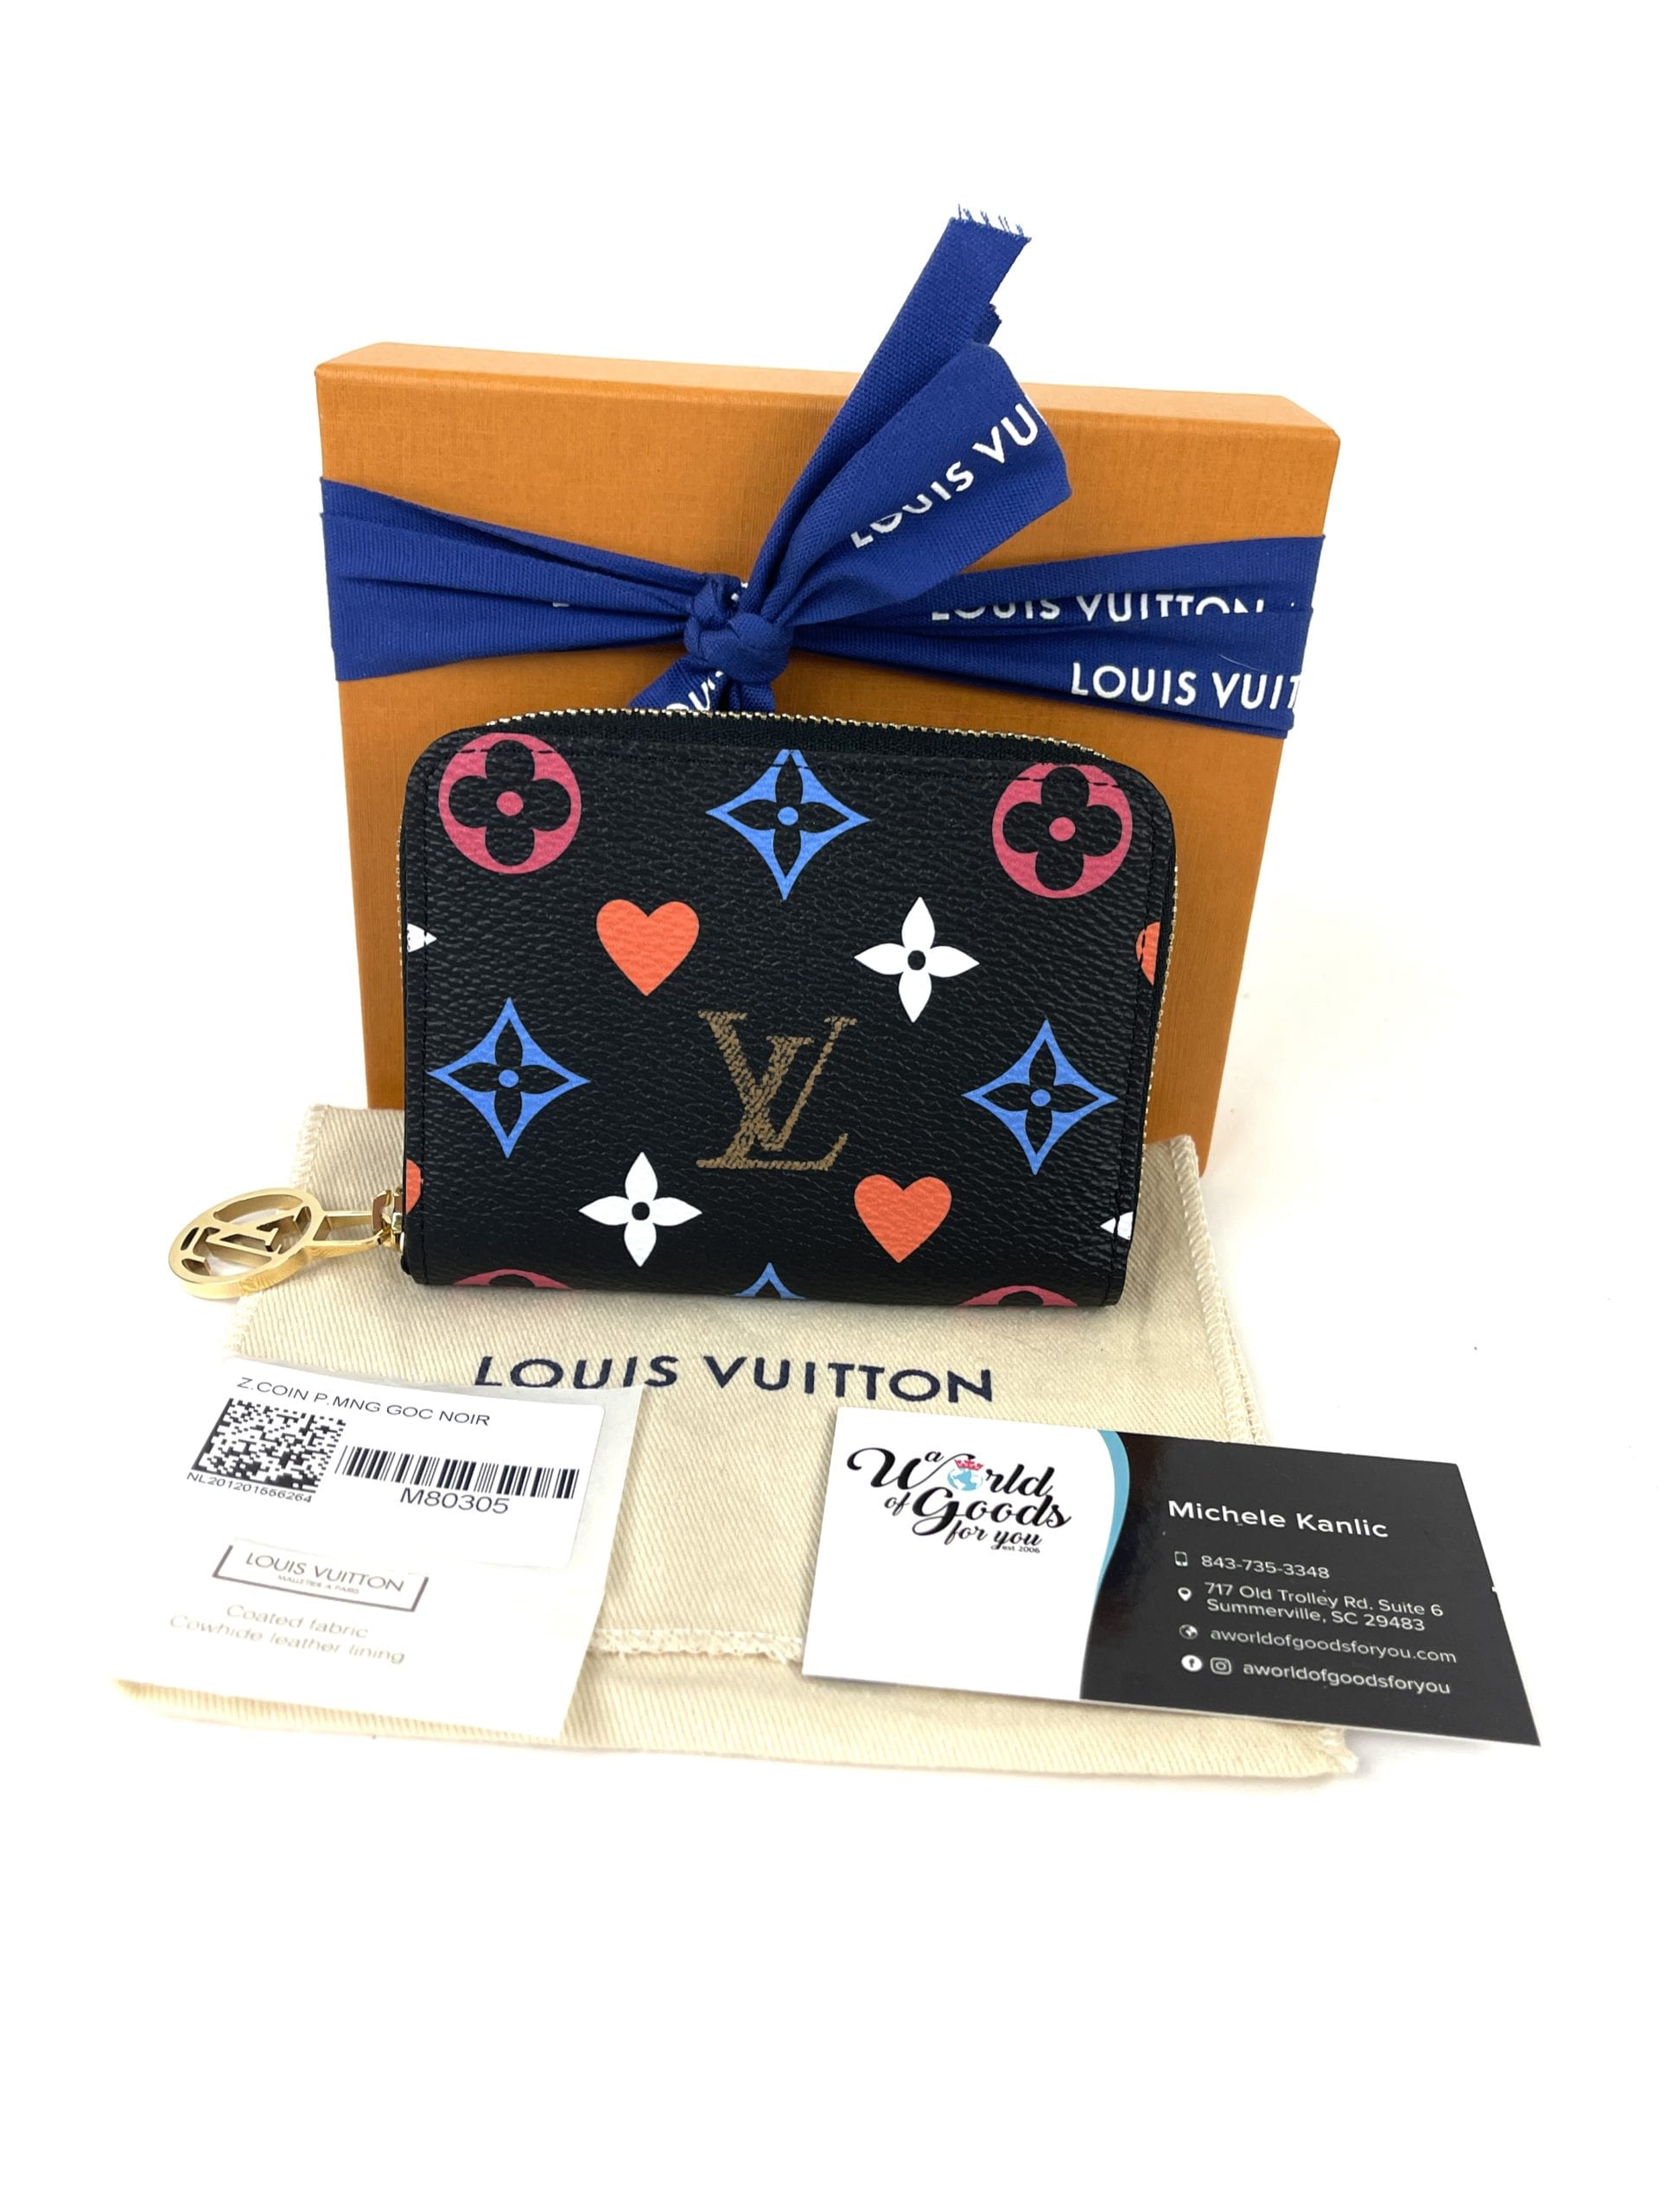 Louis Vuitton Game On Zippy Coin Wallet - A World Of Goods For You, LLC